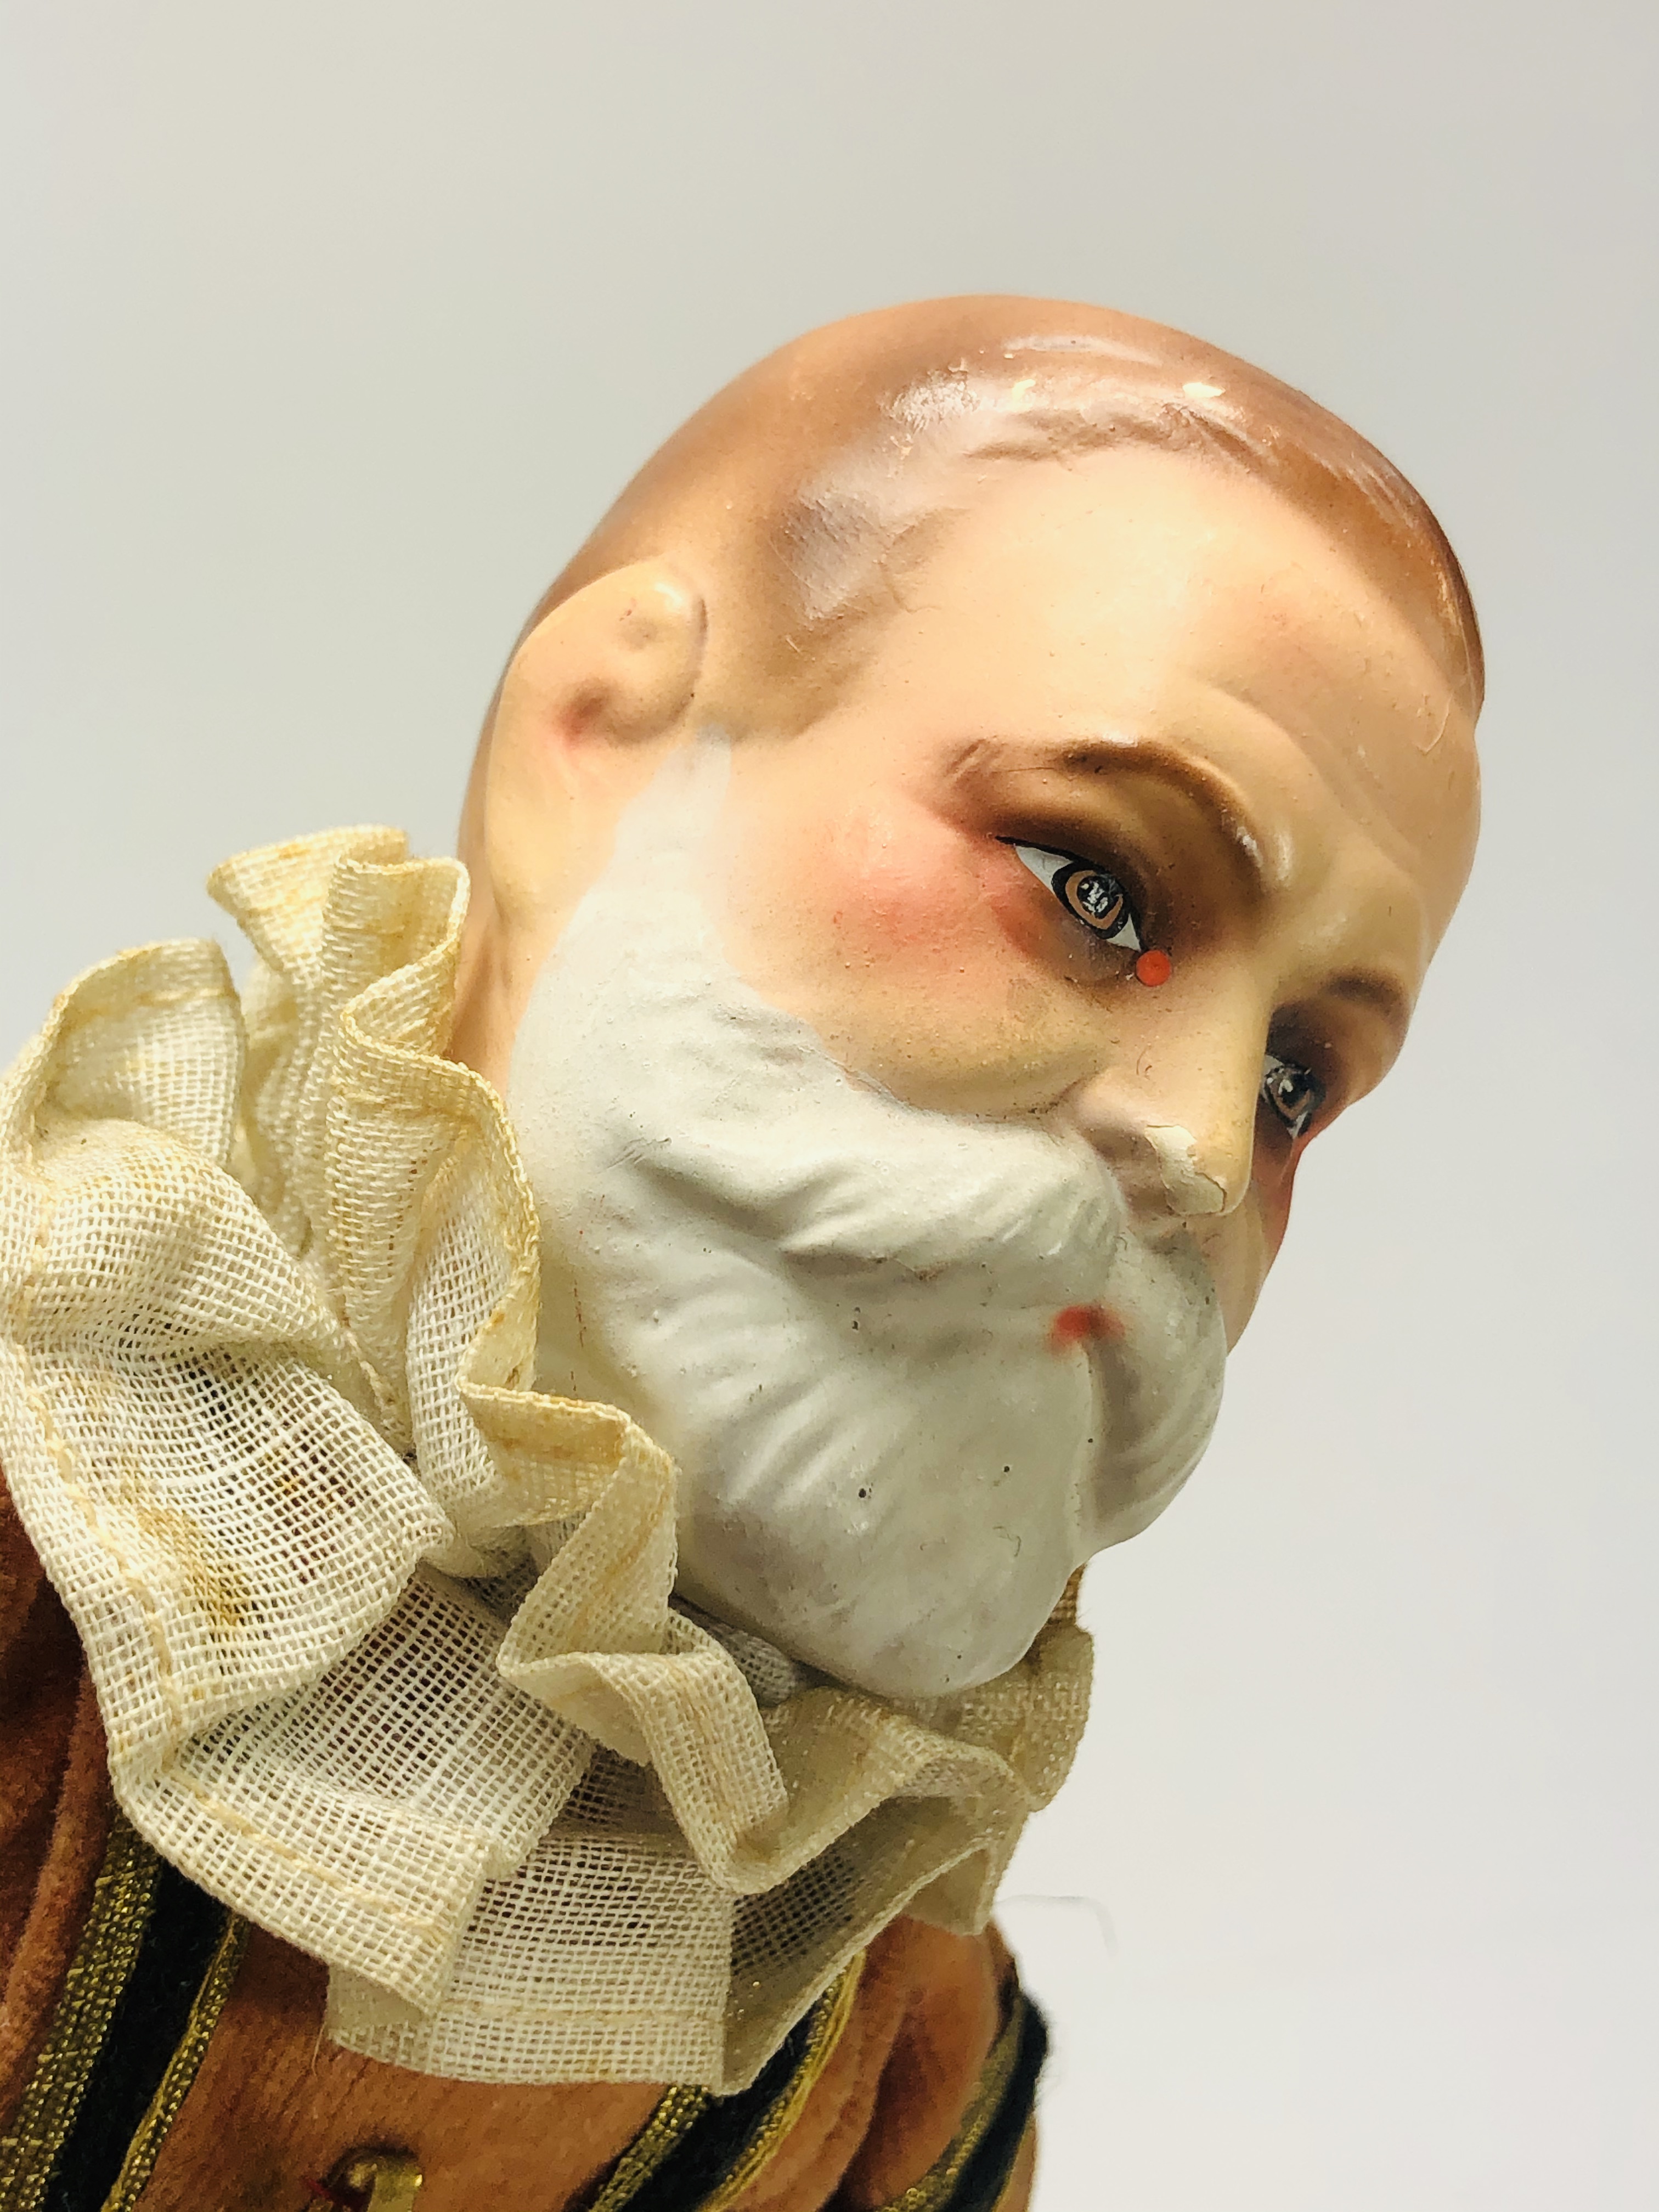 Rare Antique Beefeater doll from Germany, 12". Hand painted composition head and cloth body. - Image 3 of 6